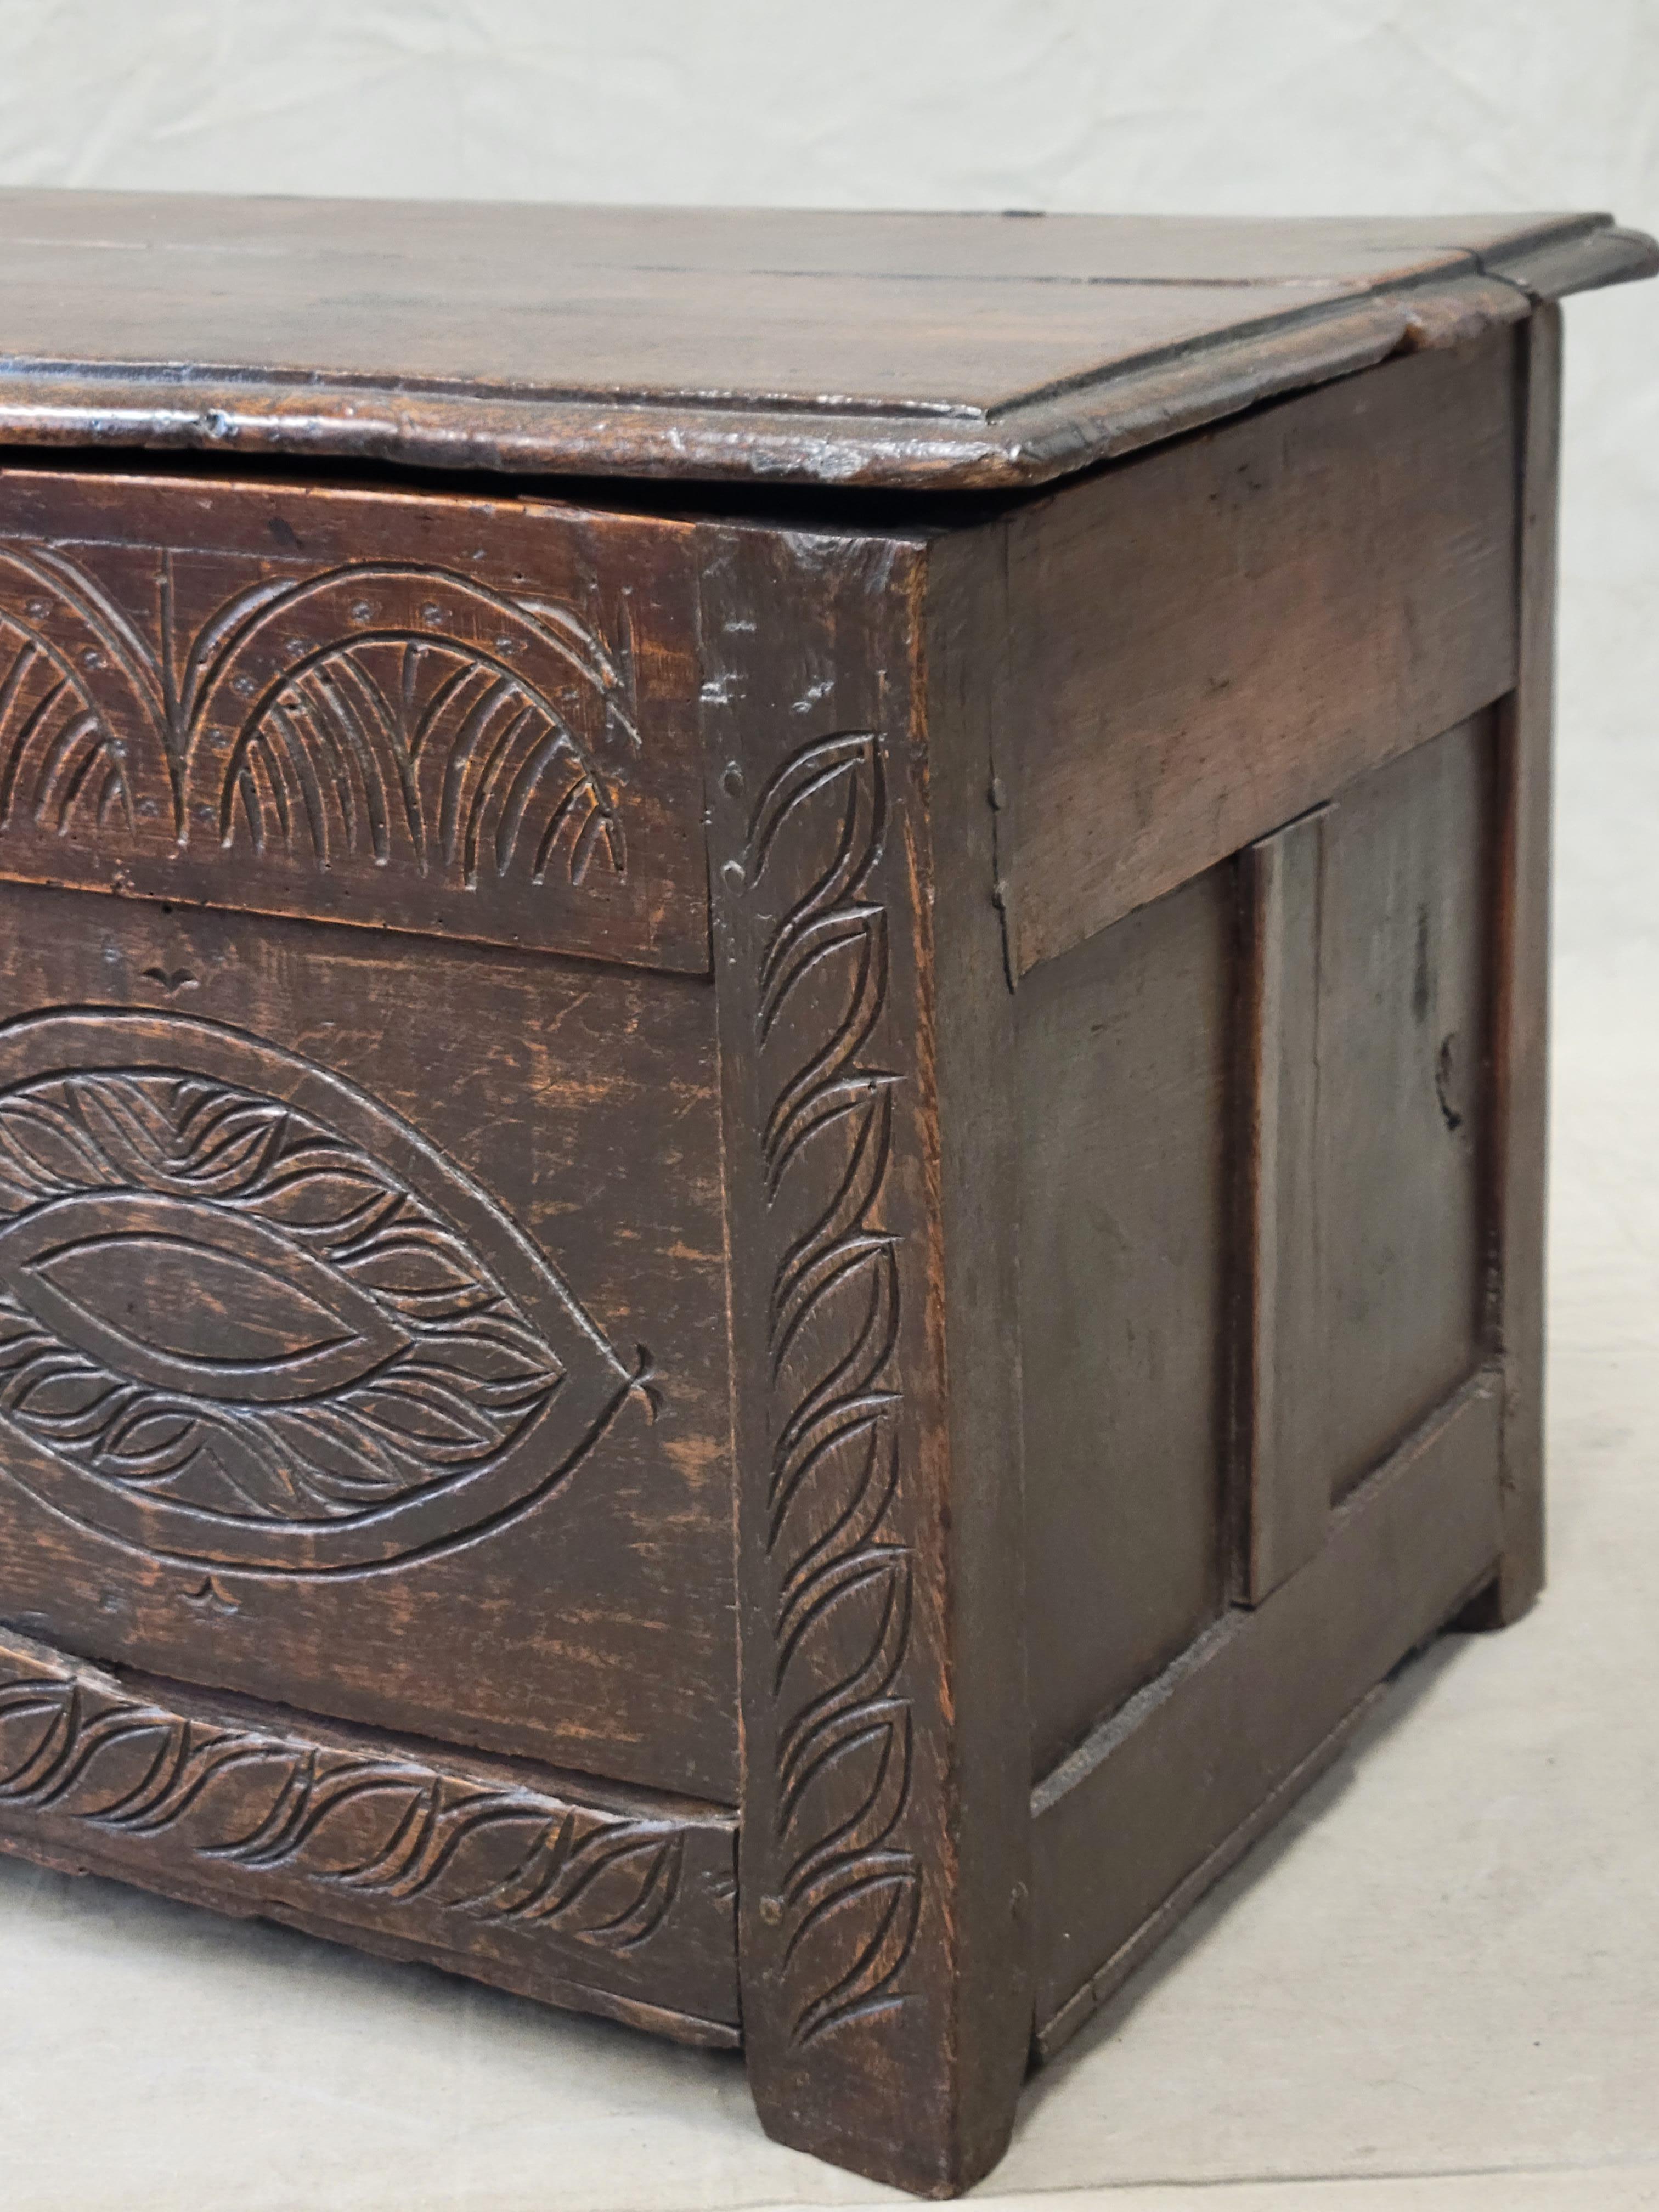 Antique 1800s English Carved Oak Coffer Storage Trunk Box In Good Condition For Sale In Centennial, CO